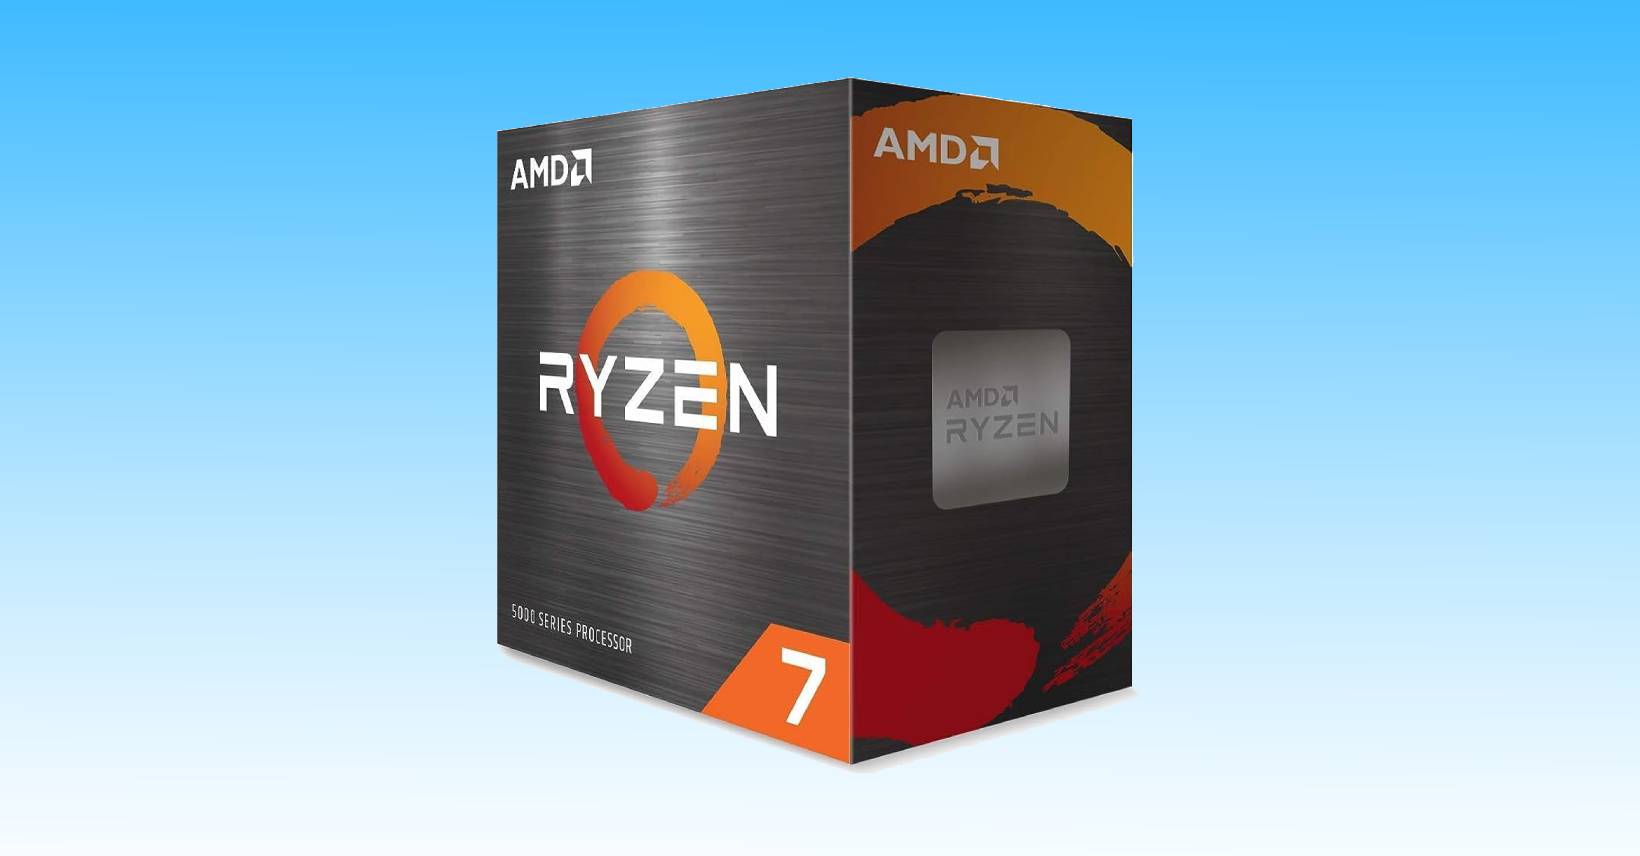 Save over 50% on this amazing AMD Ryzen 7 5800X CPU Deal - Silent PC Review